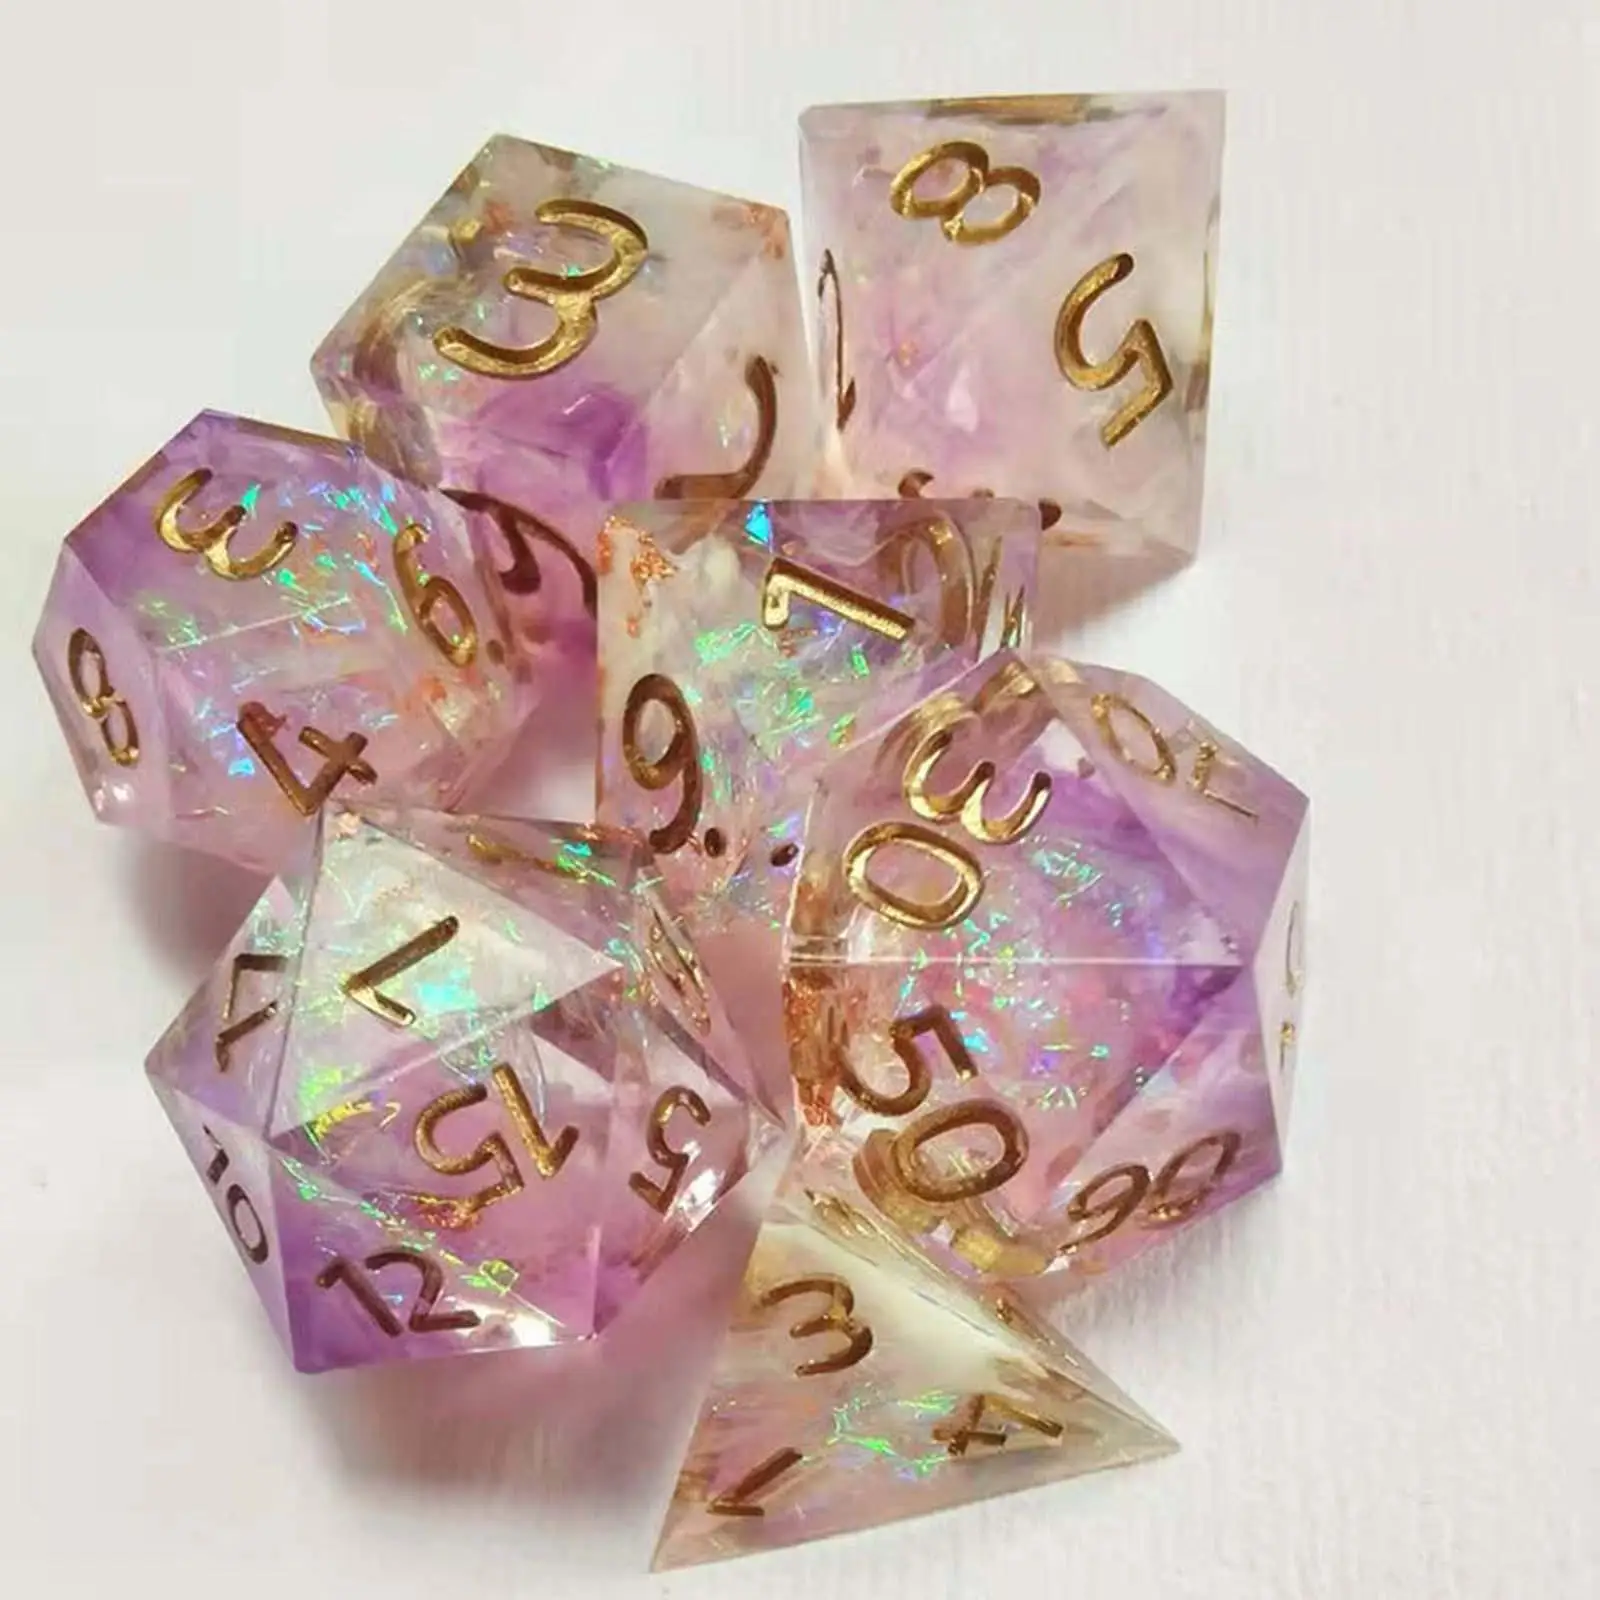 7 Pieces Transparent Polyhedral Dice D4 D6 D8 D10 D12 D20 7-Die DND Role Playing Game Dice Set for MTG Board Game Table Games